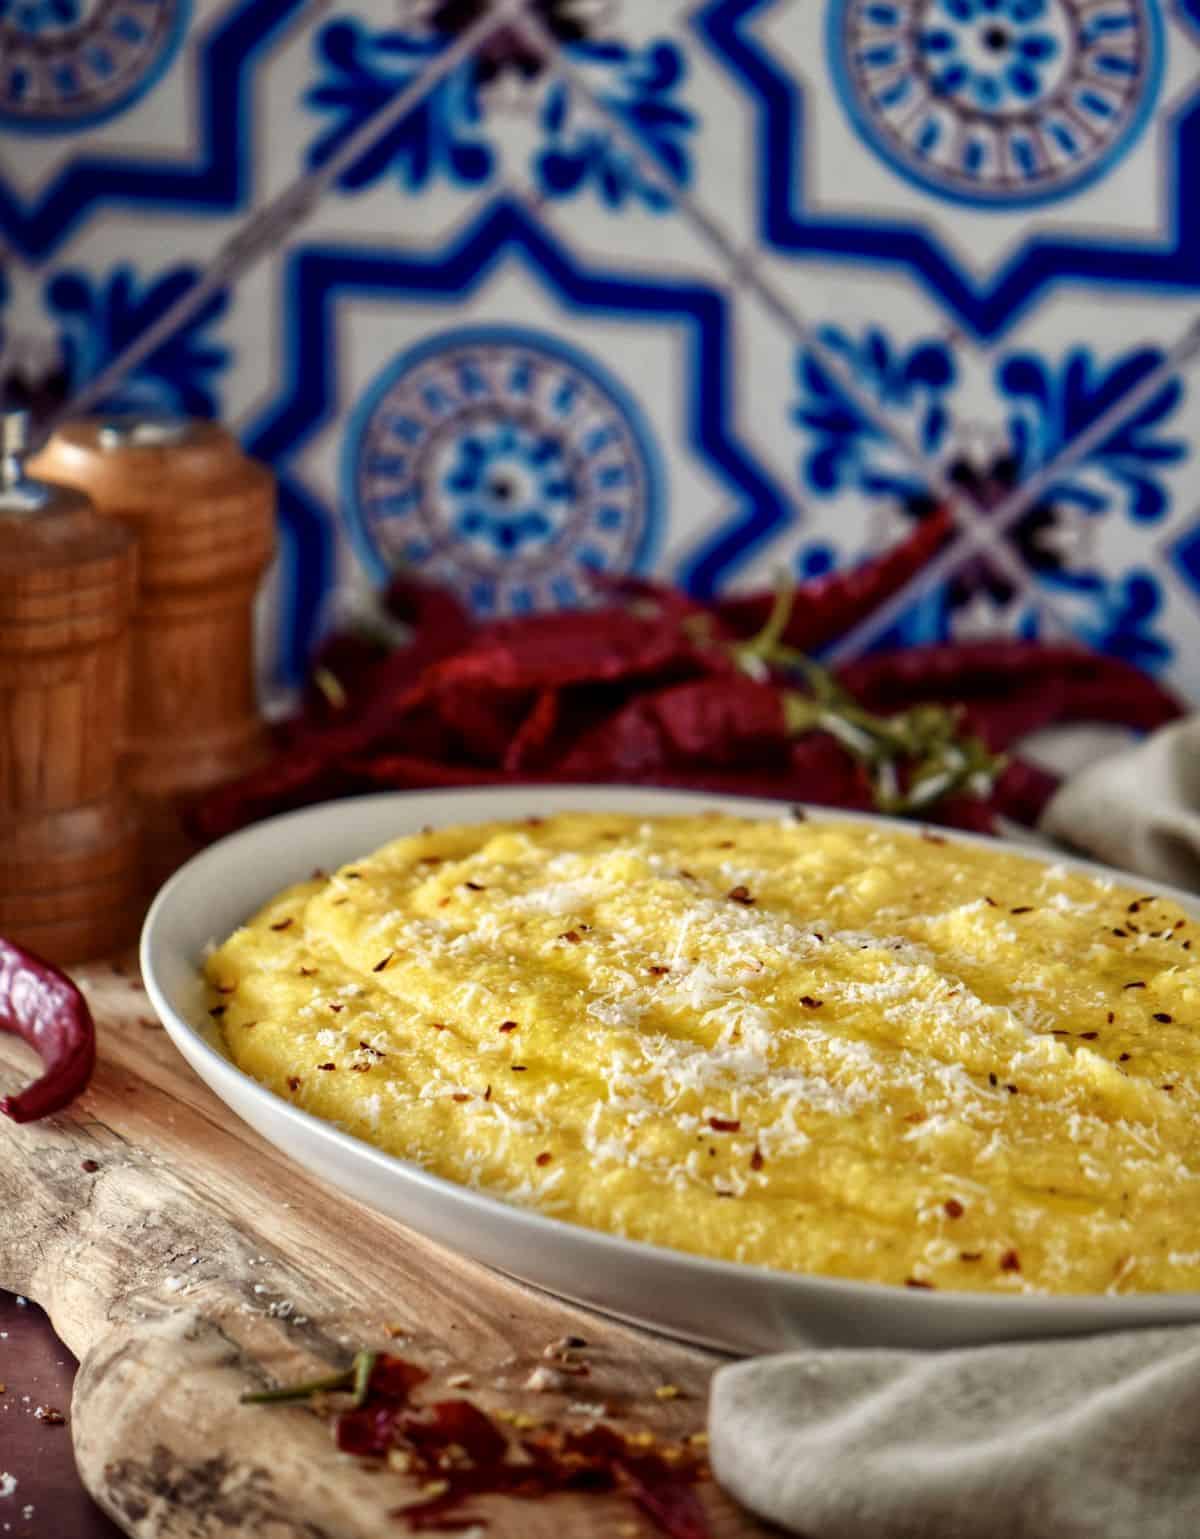 Cornmeal polenta in a white oval serving dish, topped with cheese, olive oil and crushed chili peppers.